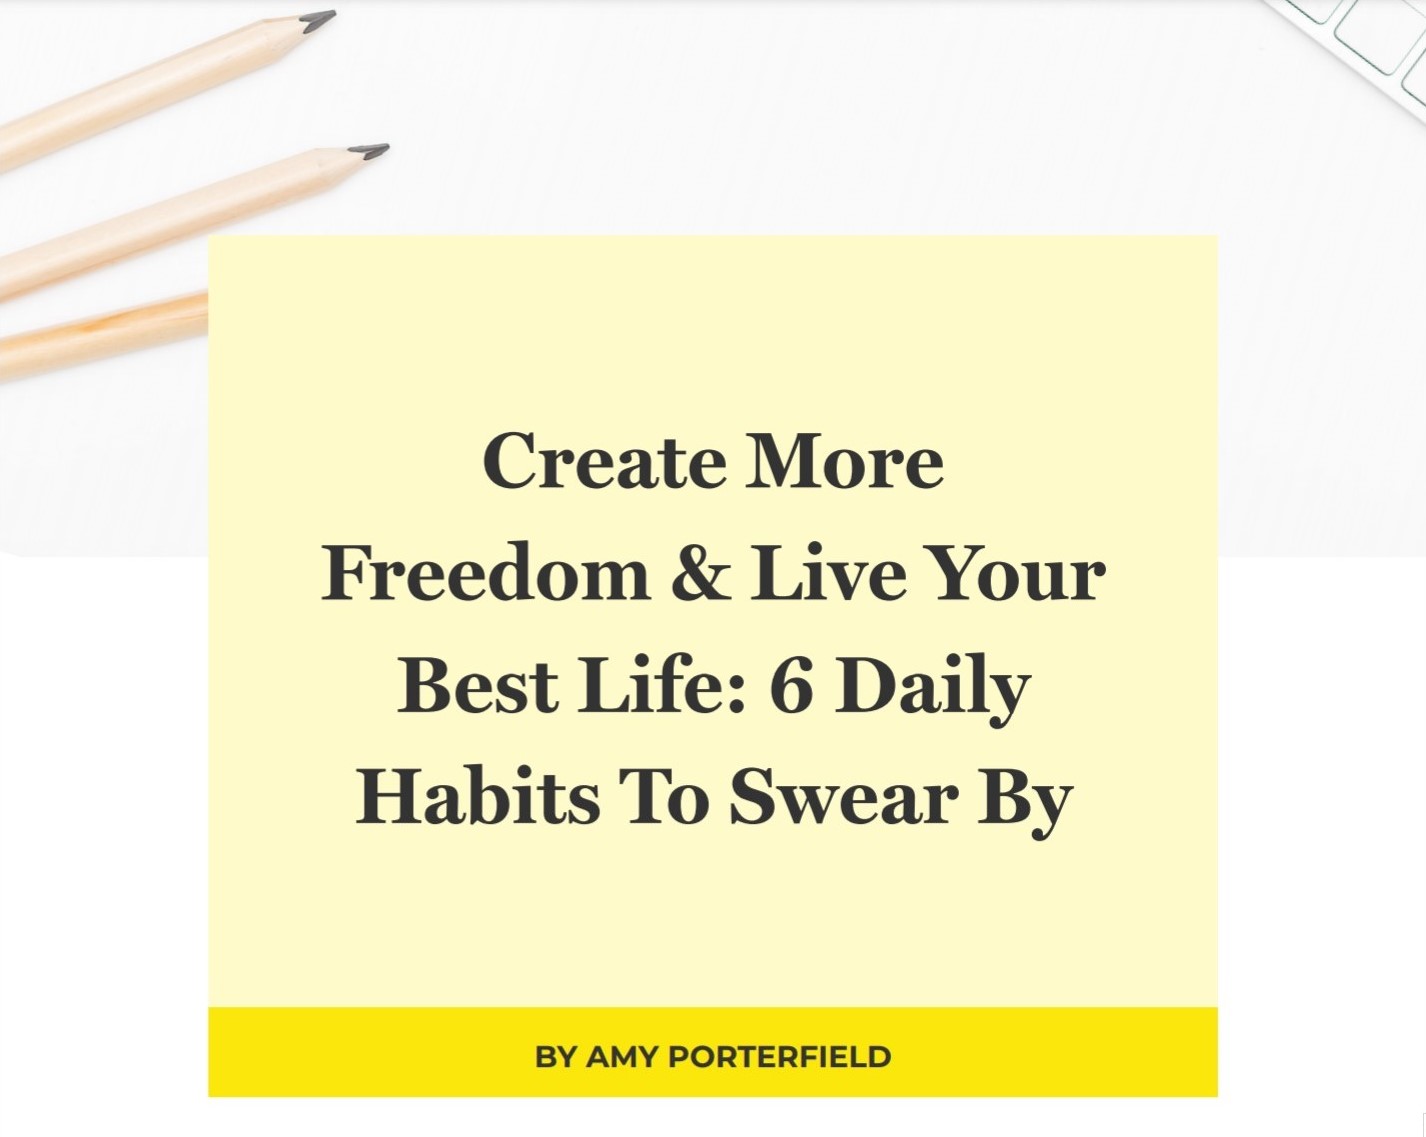 6 daily habits graphic